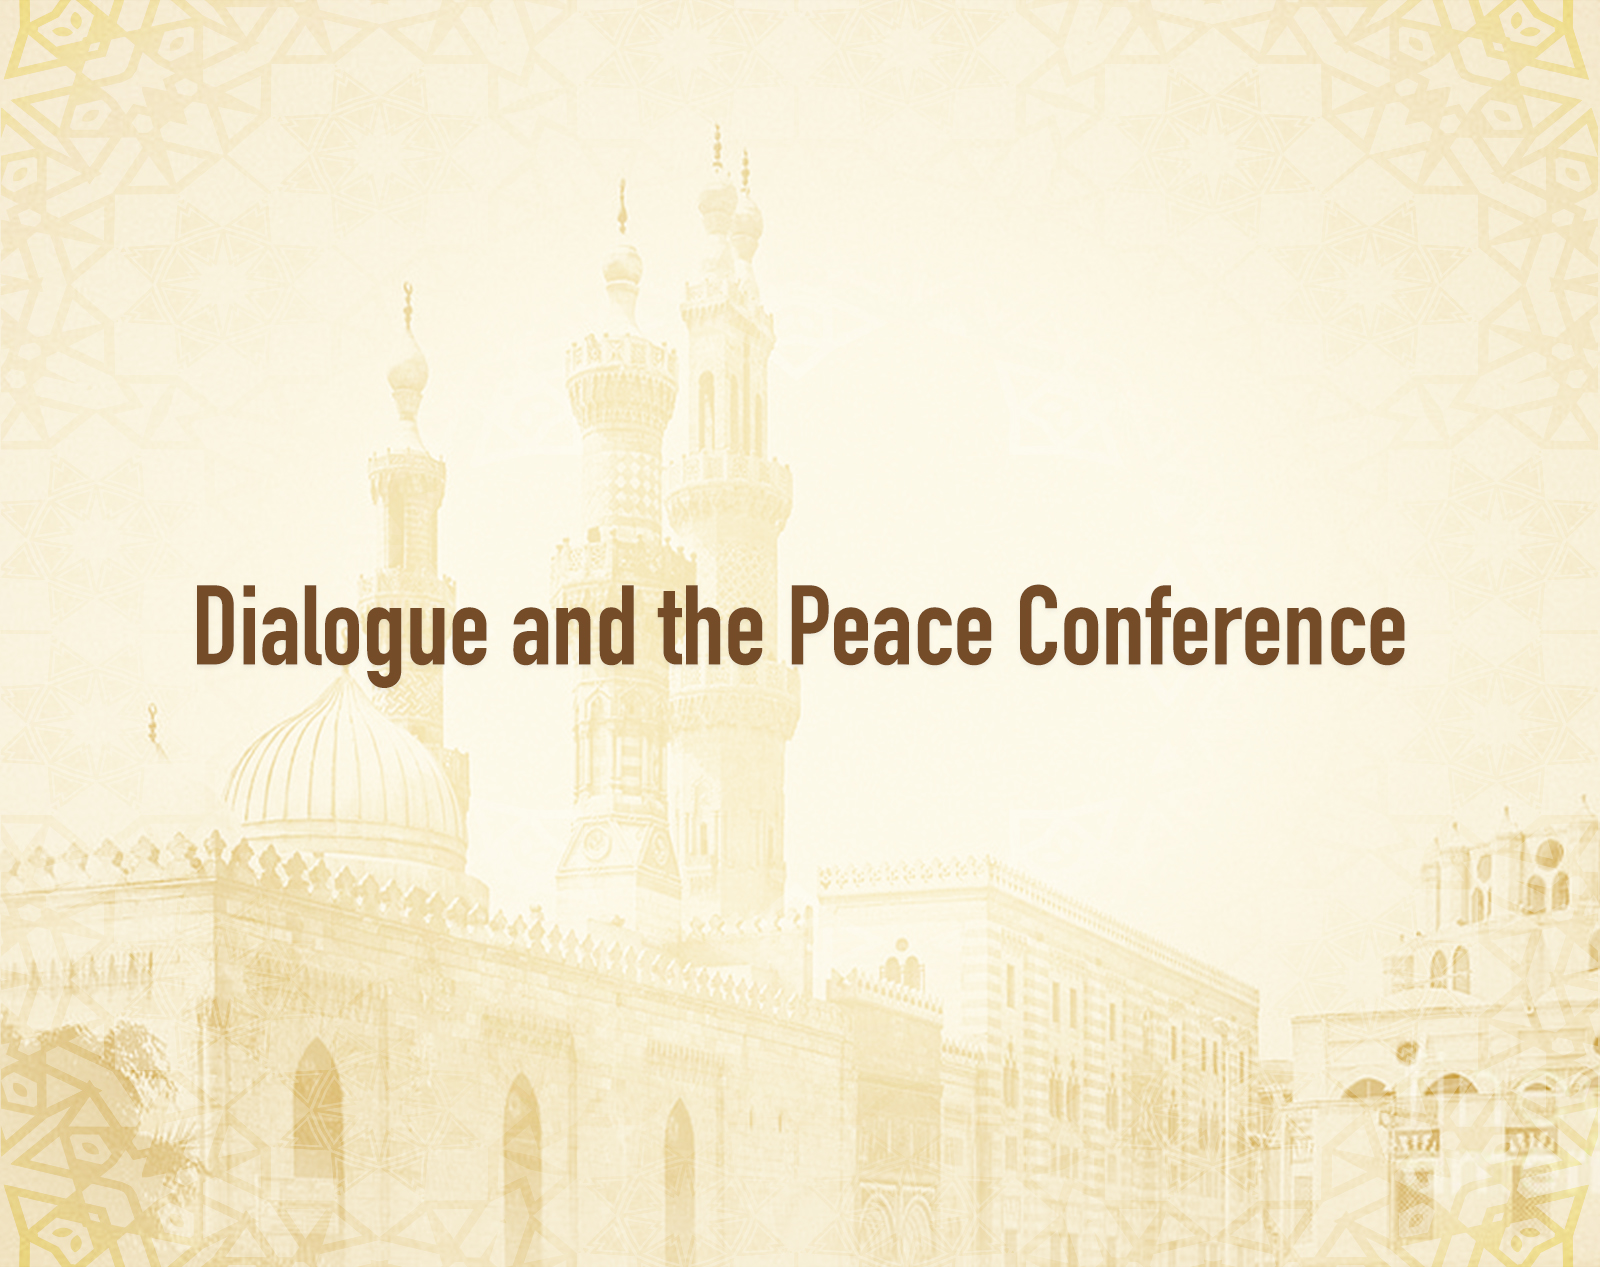 Dialogue and the Peace Conference.jpg